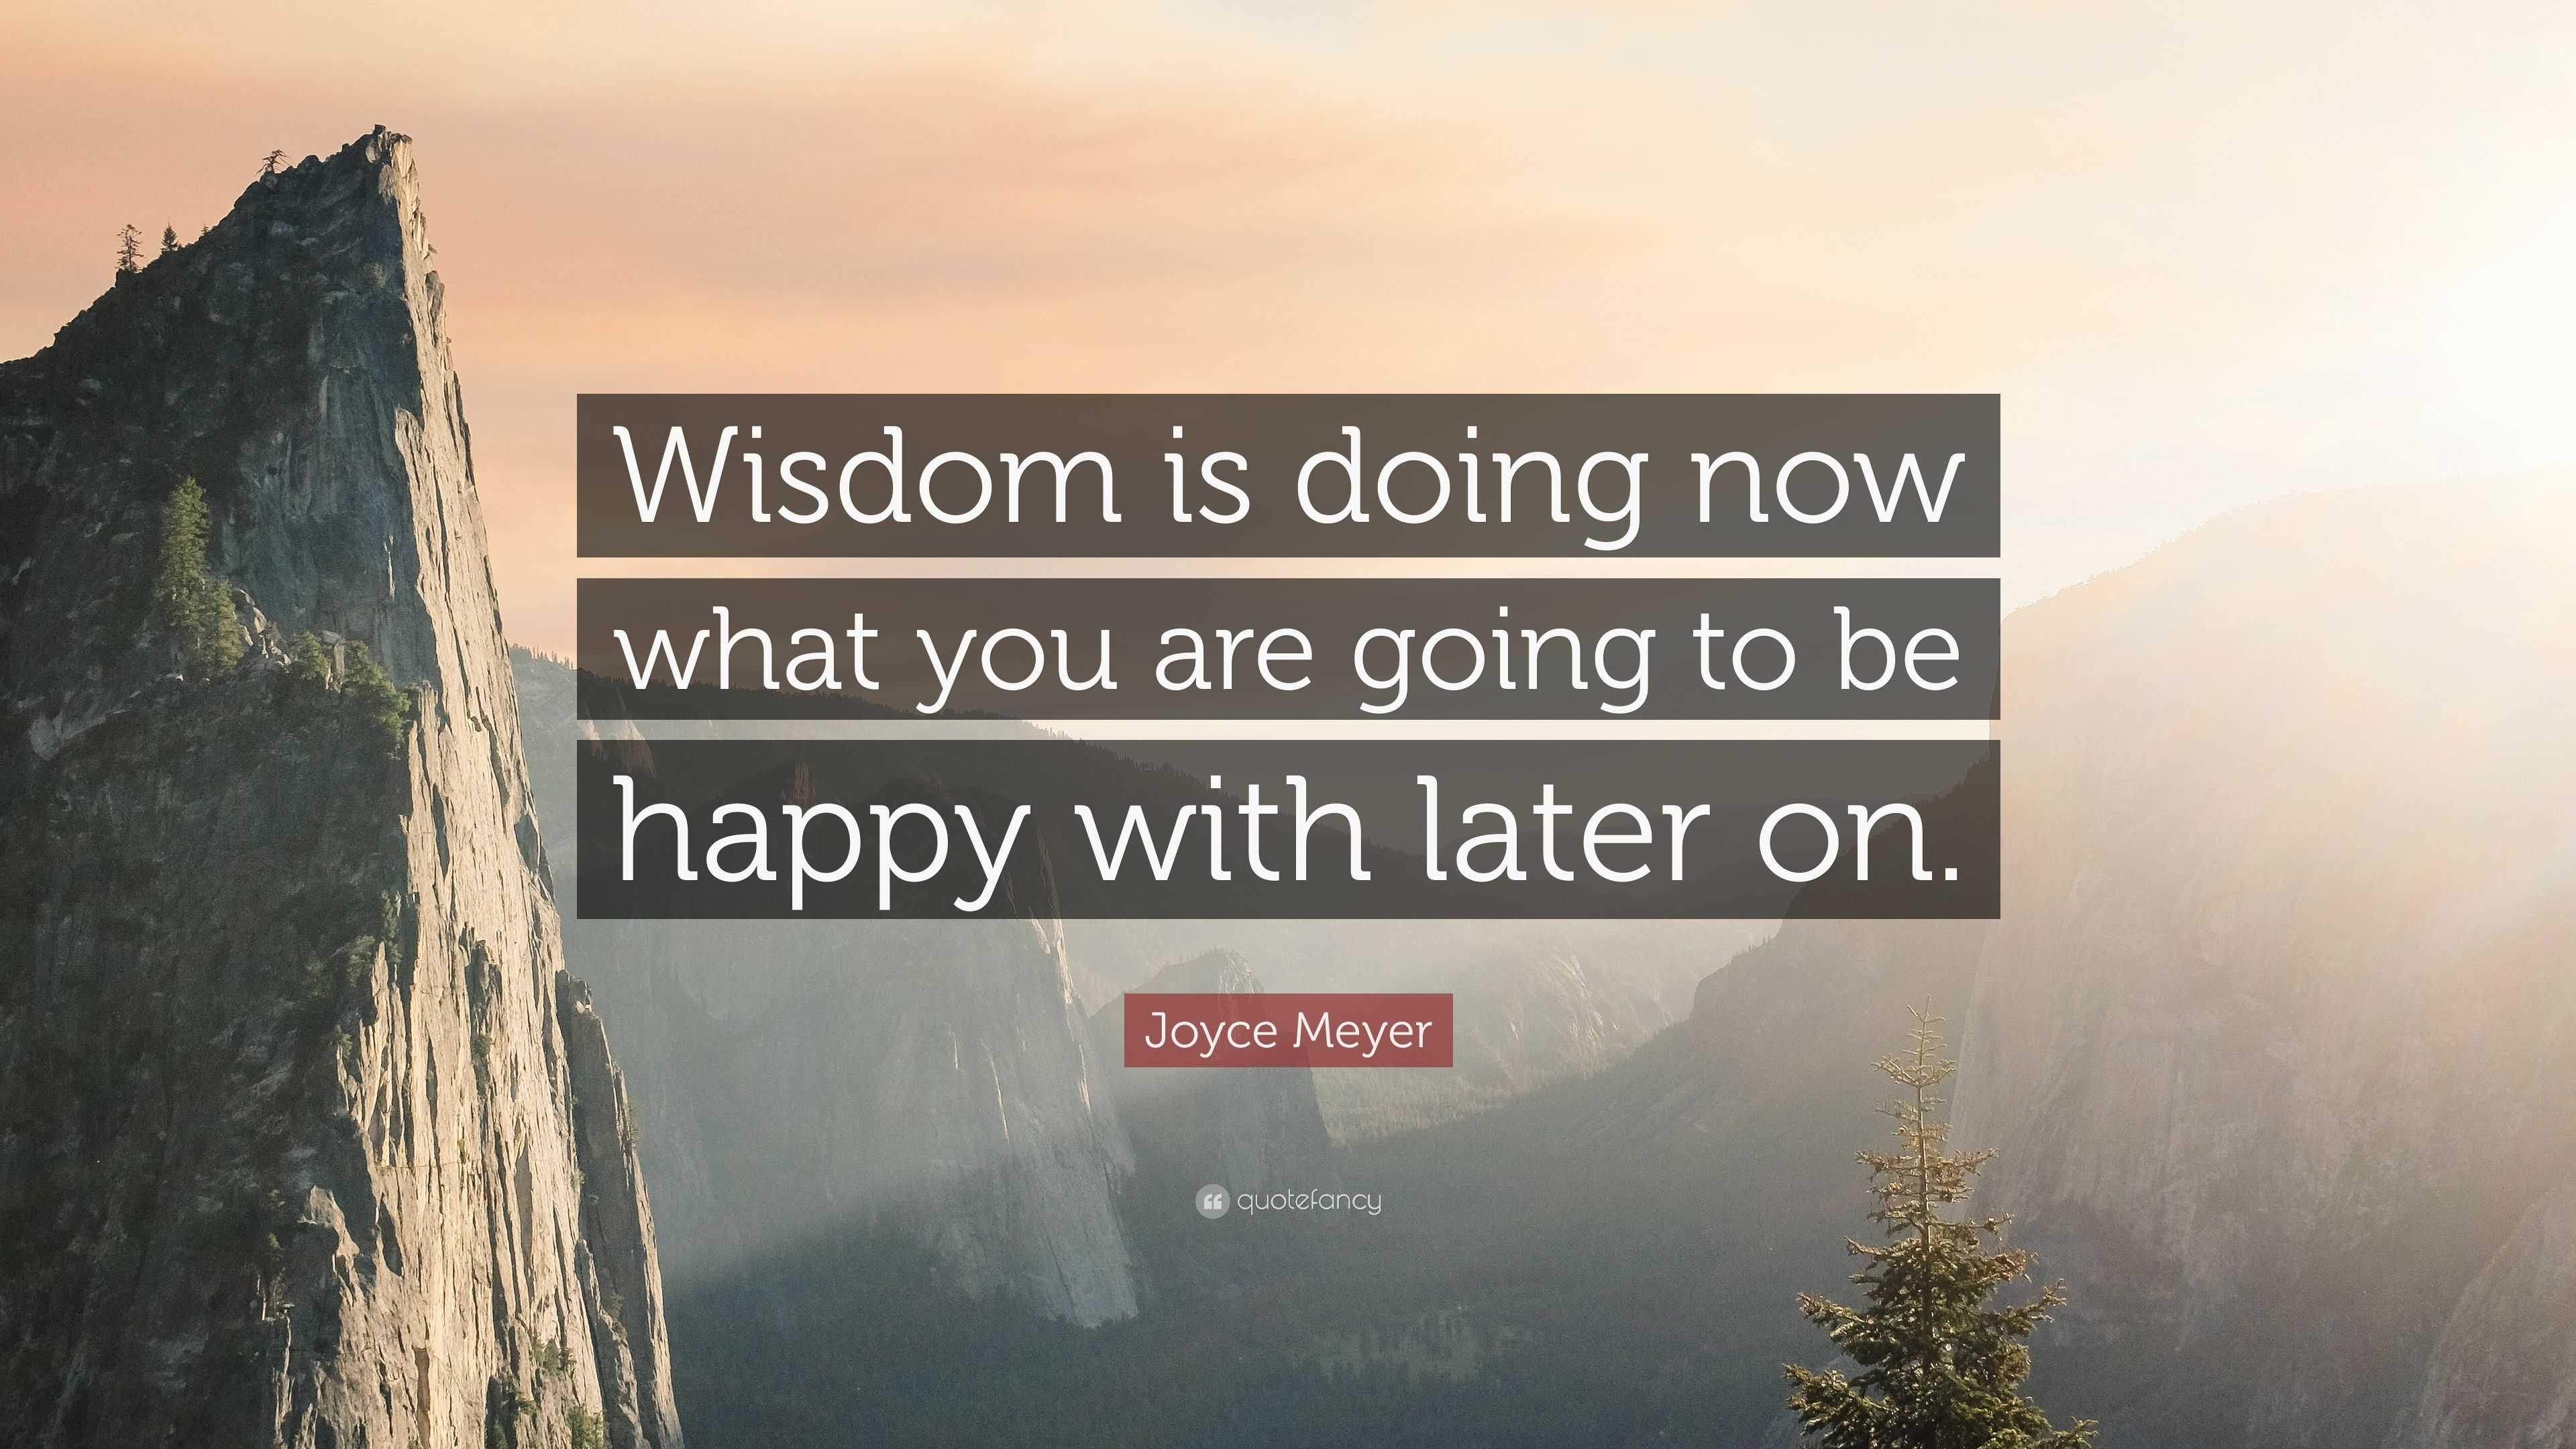 Joyce Meyer Quote “wisdom Is Doing Now What You Are Going To Be Happy